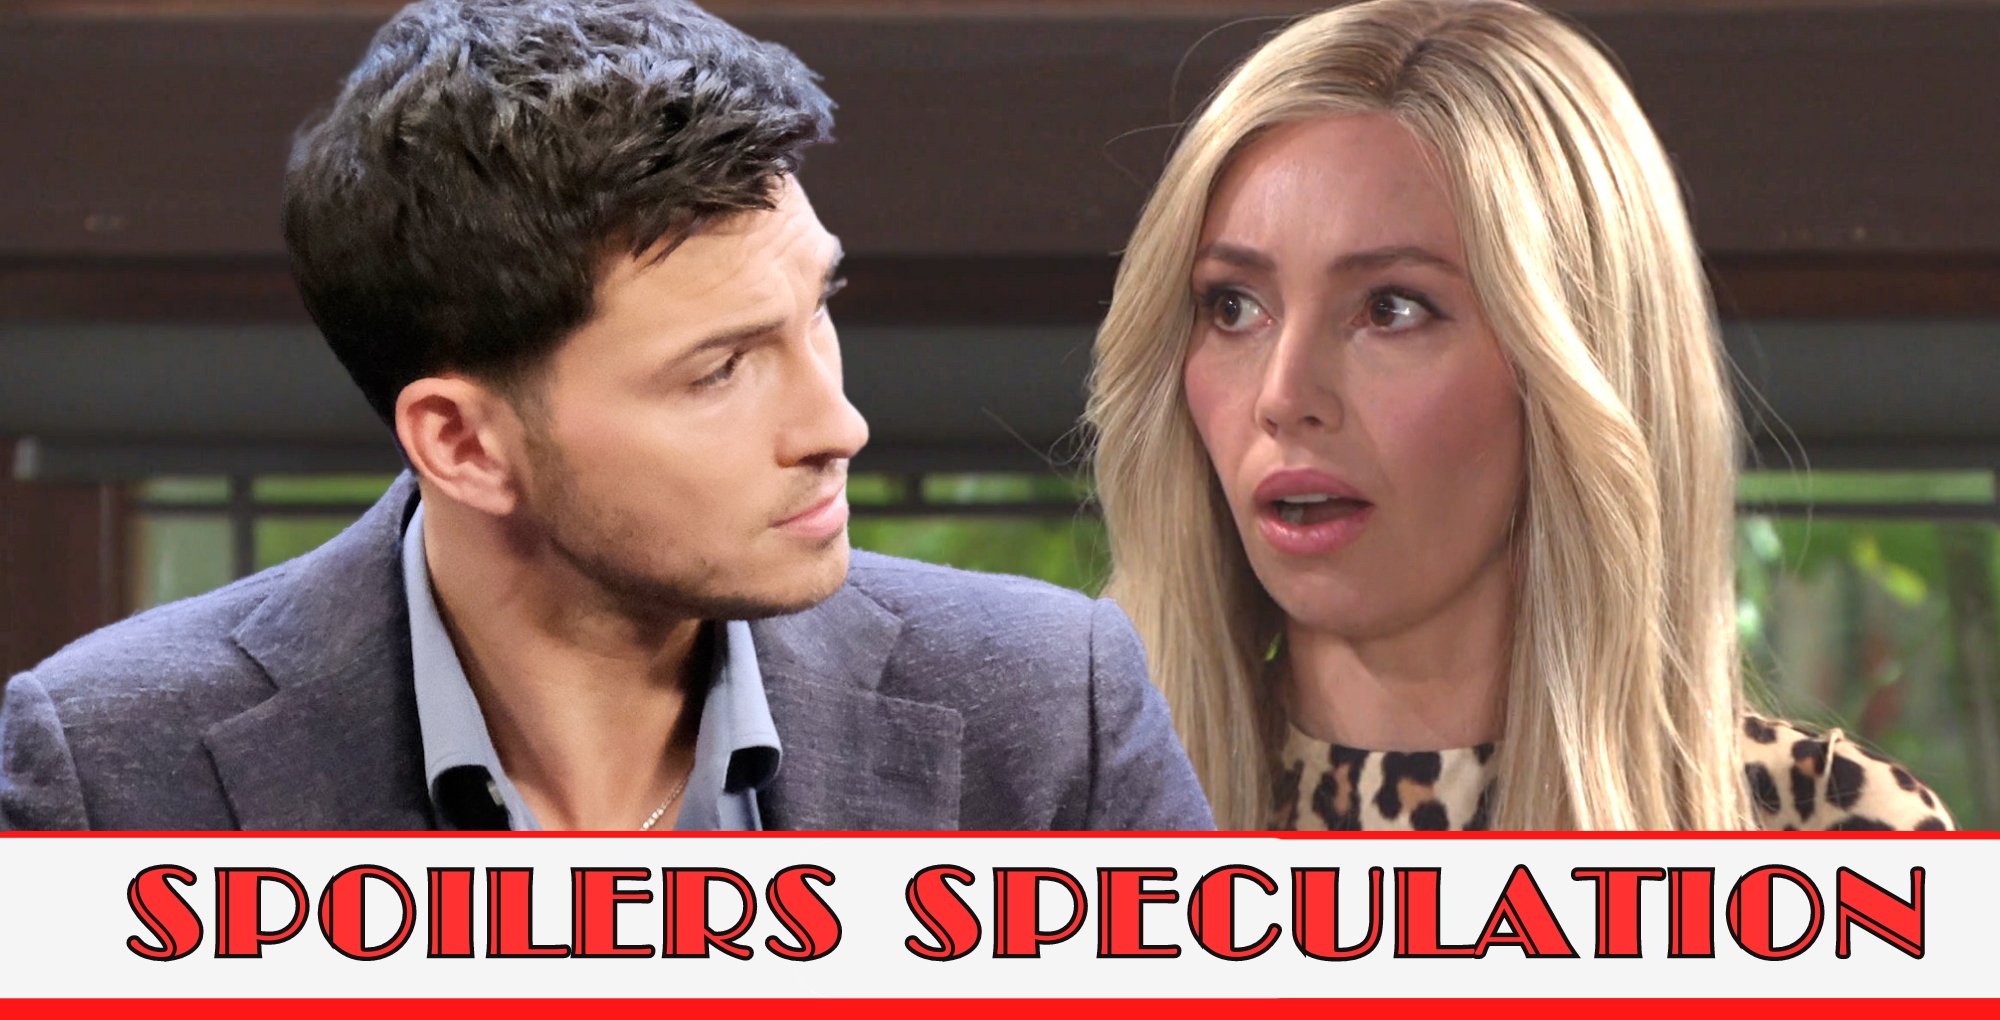 days spoilers speculation banner over alex and theresa.